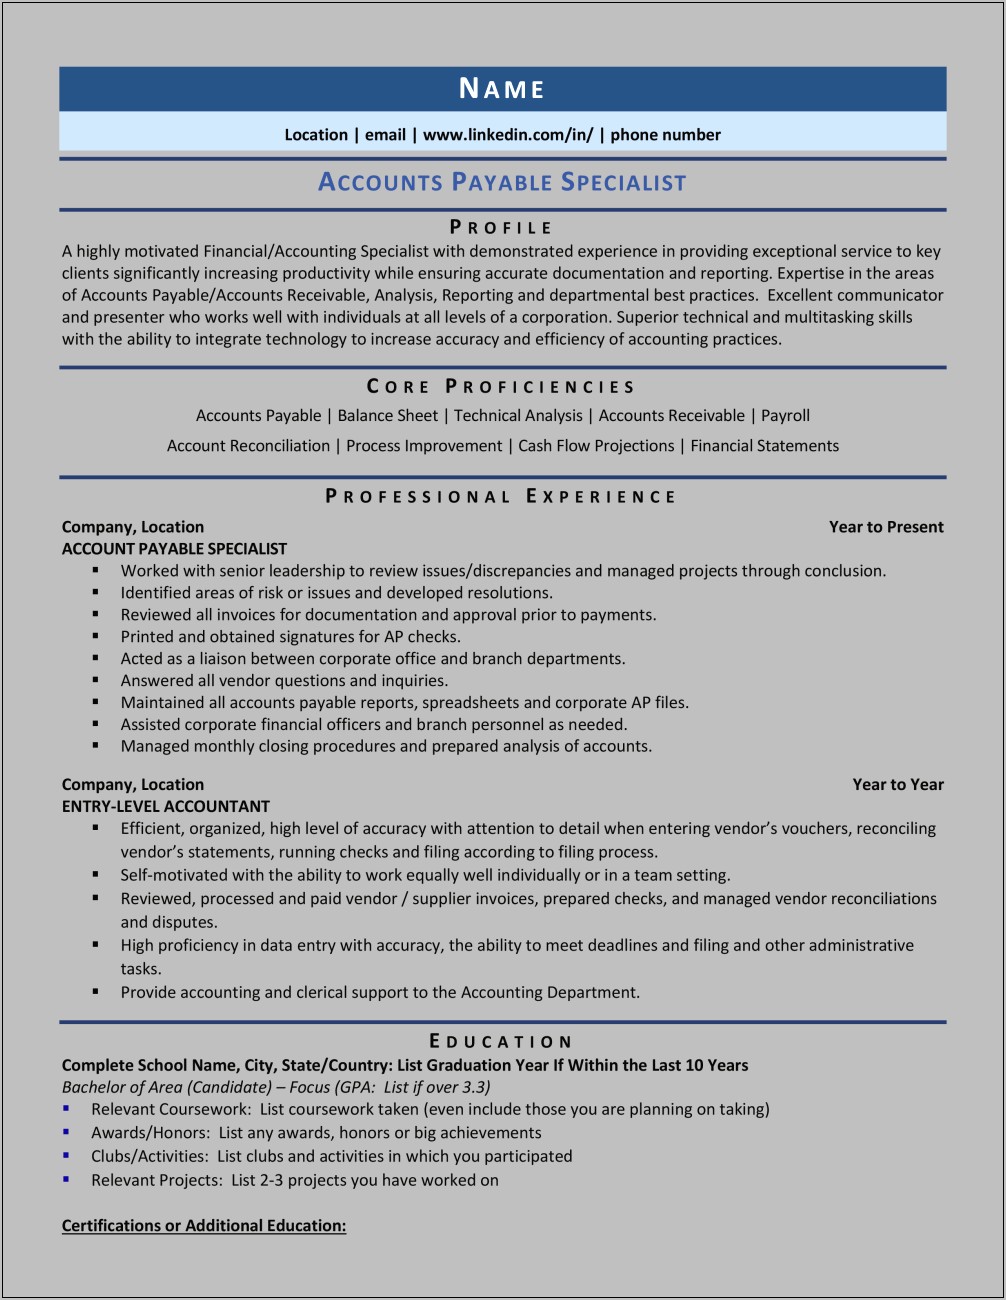 Sample Resume For Accounts Payable Specialist